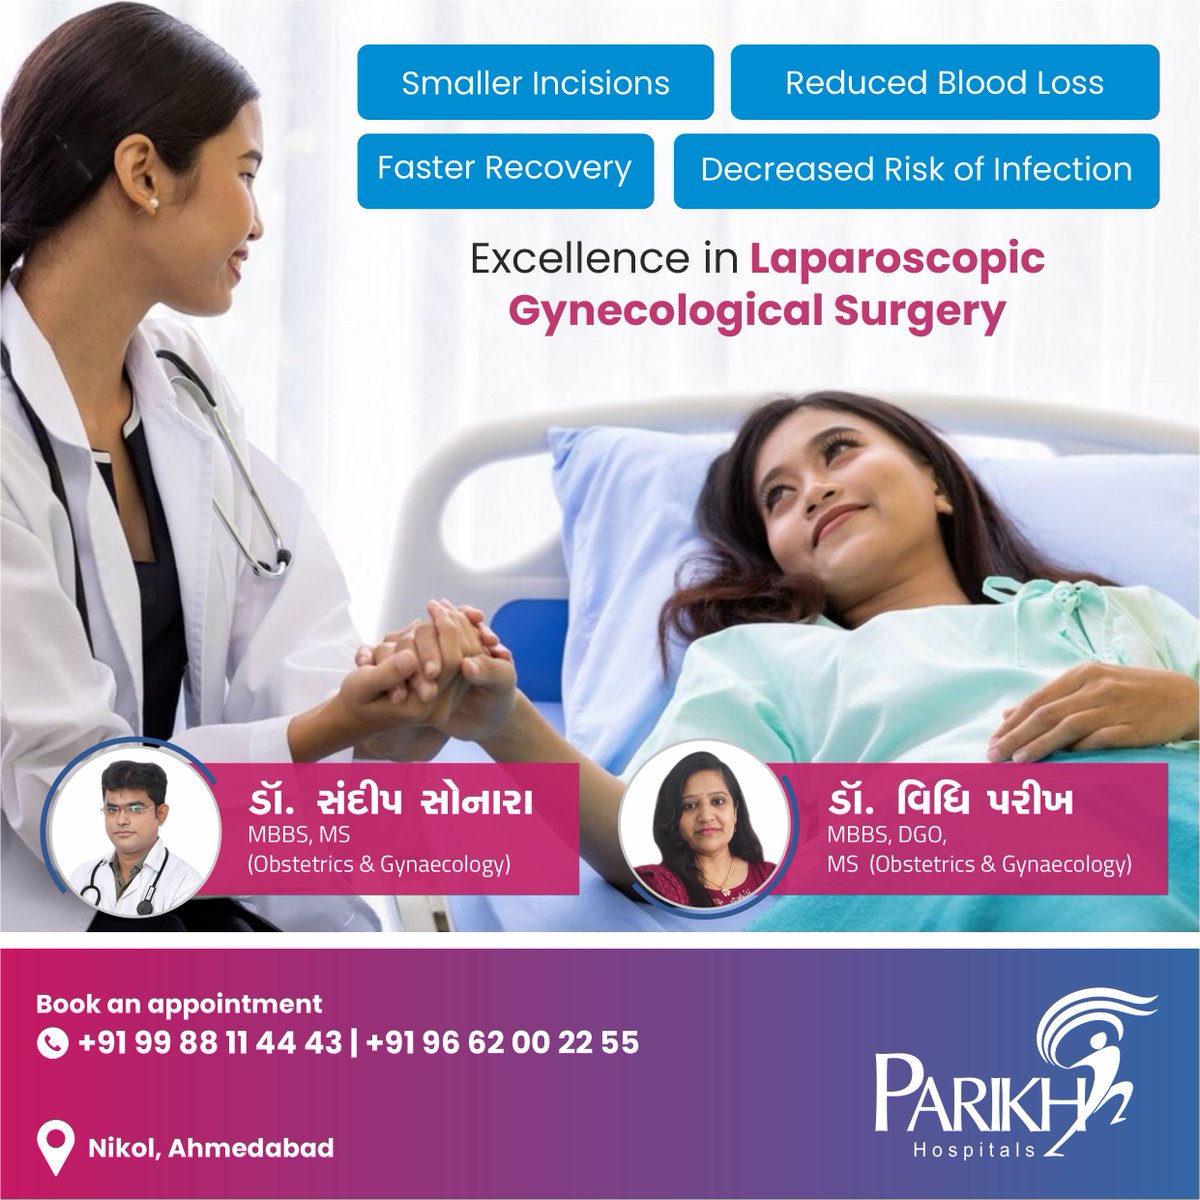 #Laparoscopic #gynecological surgery is a minimally invasive approach that allows the surgeon to operate without making a large incision. Visit #ParikhHospitals, Nikol and consult with our skilled team of Obstetrics and Gynecologists, IVF for all your surgical needs.